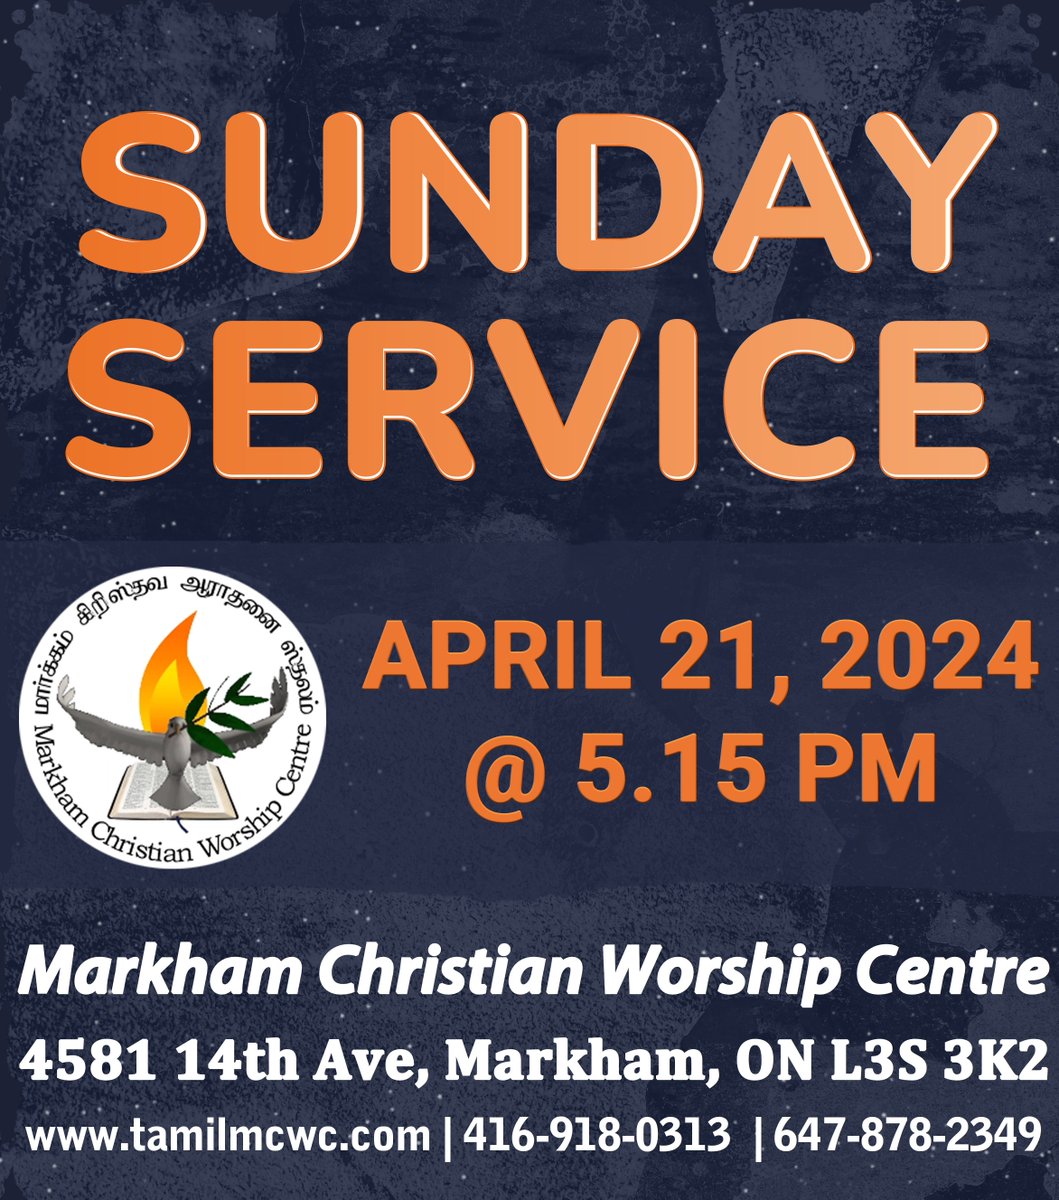 Join Us for a Sunday Service! 

Date : April 21, 2024 
Time : 5.15 pm 
Location : 4581, 14th Ave, Markham L3S 3K2

#mcwc #markhamchristianworshipcentre #markhamtamilchurch #scarboroughtamilchurch #torontotamilchurch #canadatamilchurch #canadatamil #torontotamil #tamilchurch